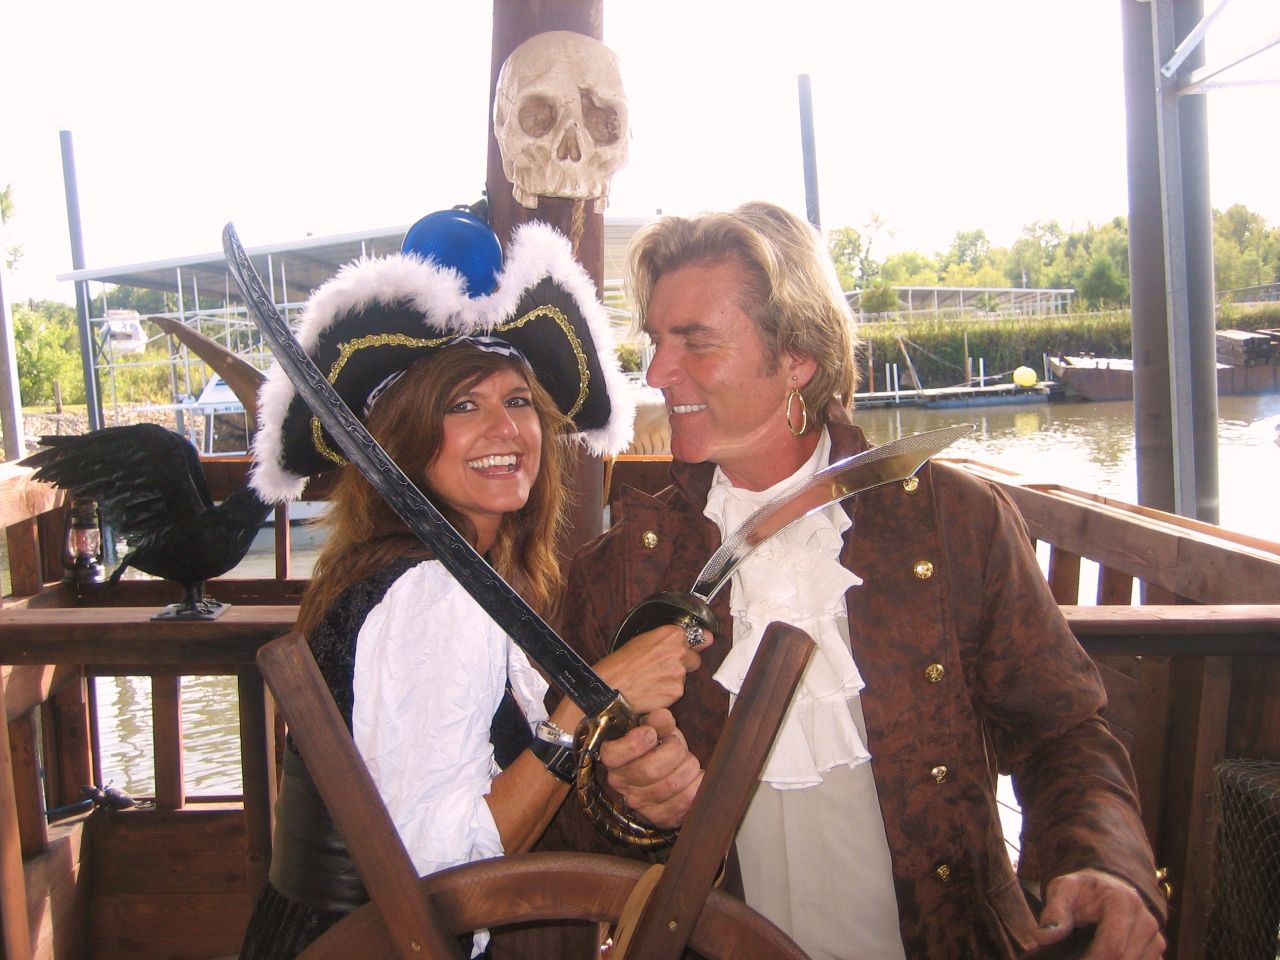 The Gypsy Rose II is one of six pirate ships built by Woodson (pictured with girlfriend "Wench Maria"), and sailed along the Mississippi River as part of sightseeing cruises. 